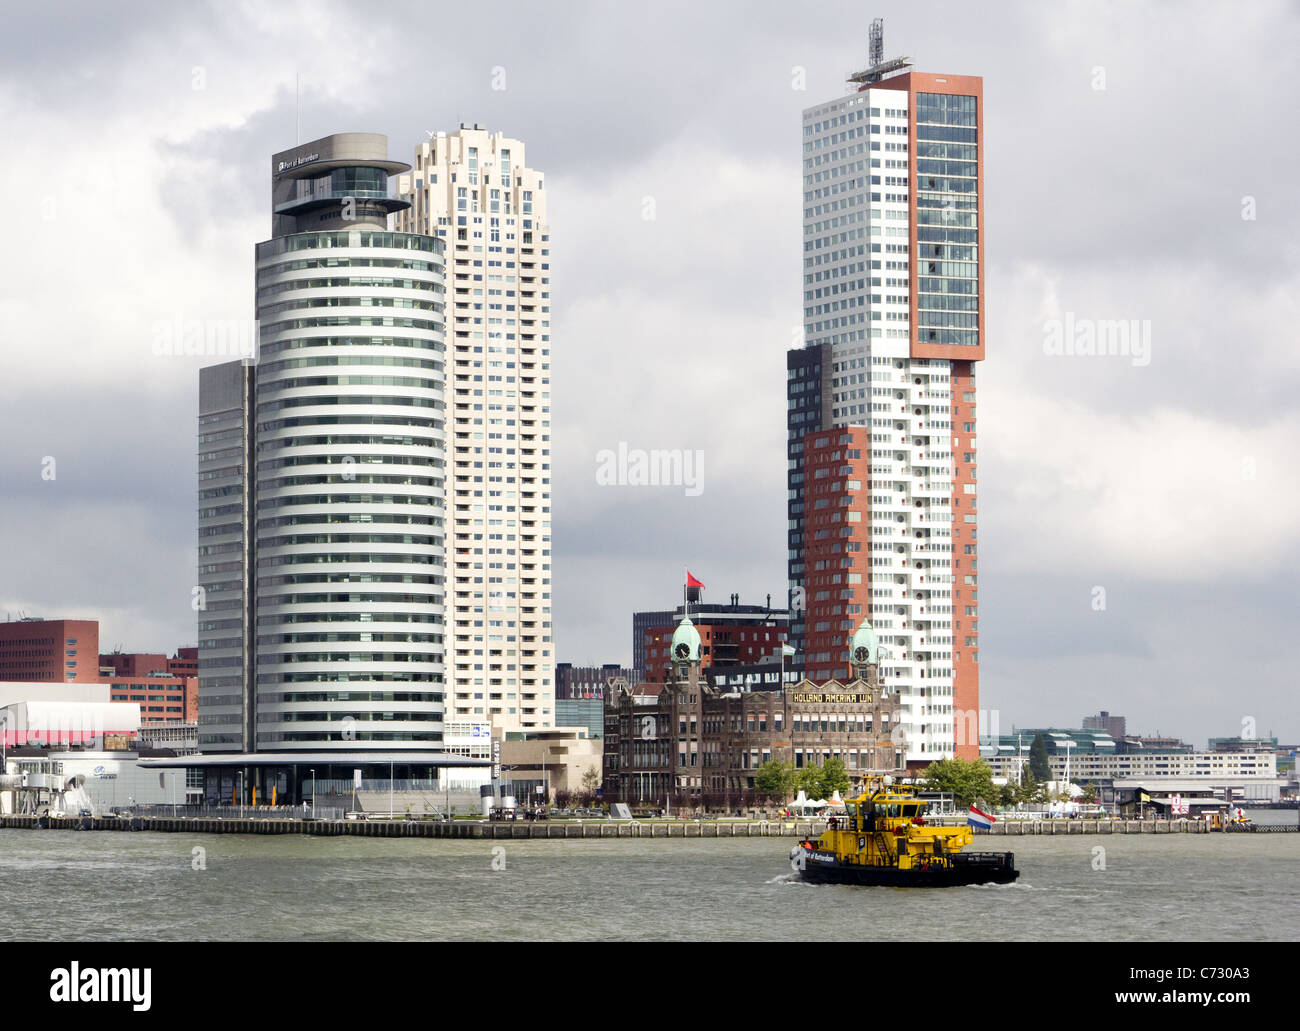 View across the Nieuwe Maas  to Kop van Zuid, the World Port Centre, Hotel New York and Montevideo tower Stock Photo